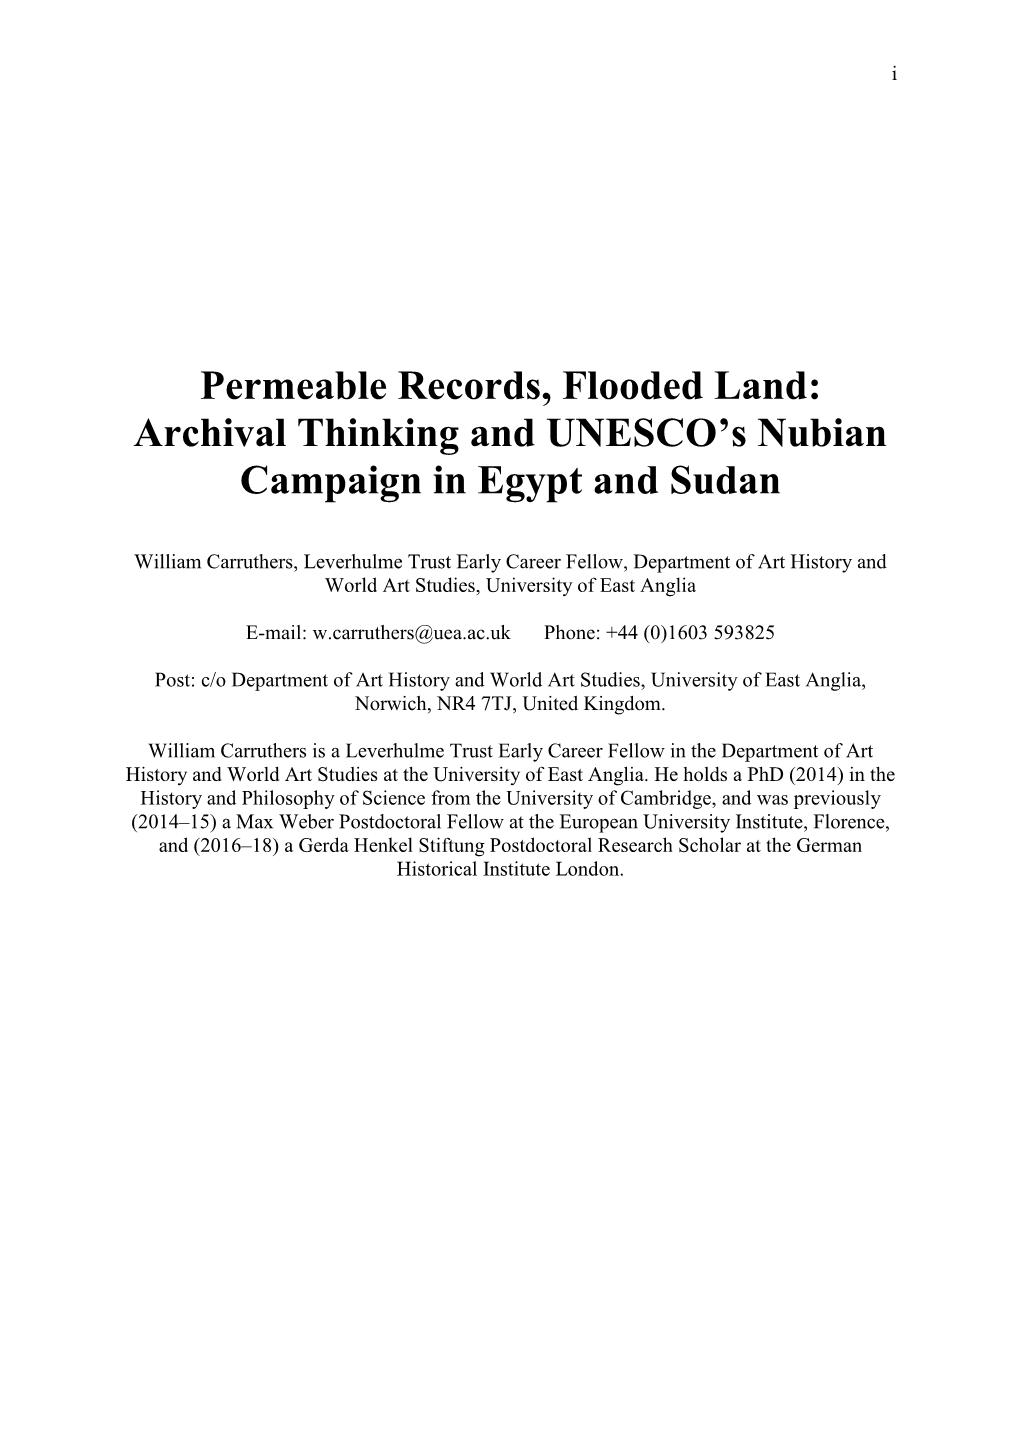 Permeable Records, Flooded Land: Archival Thinking and UNESCO's